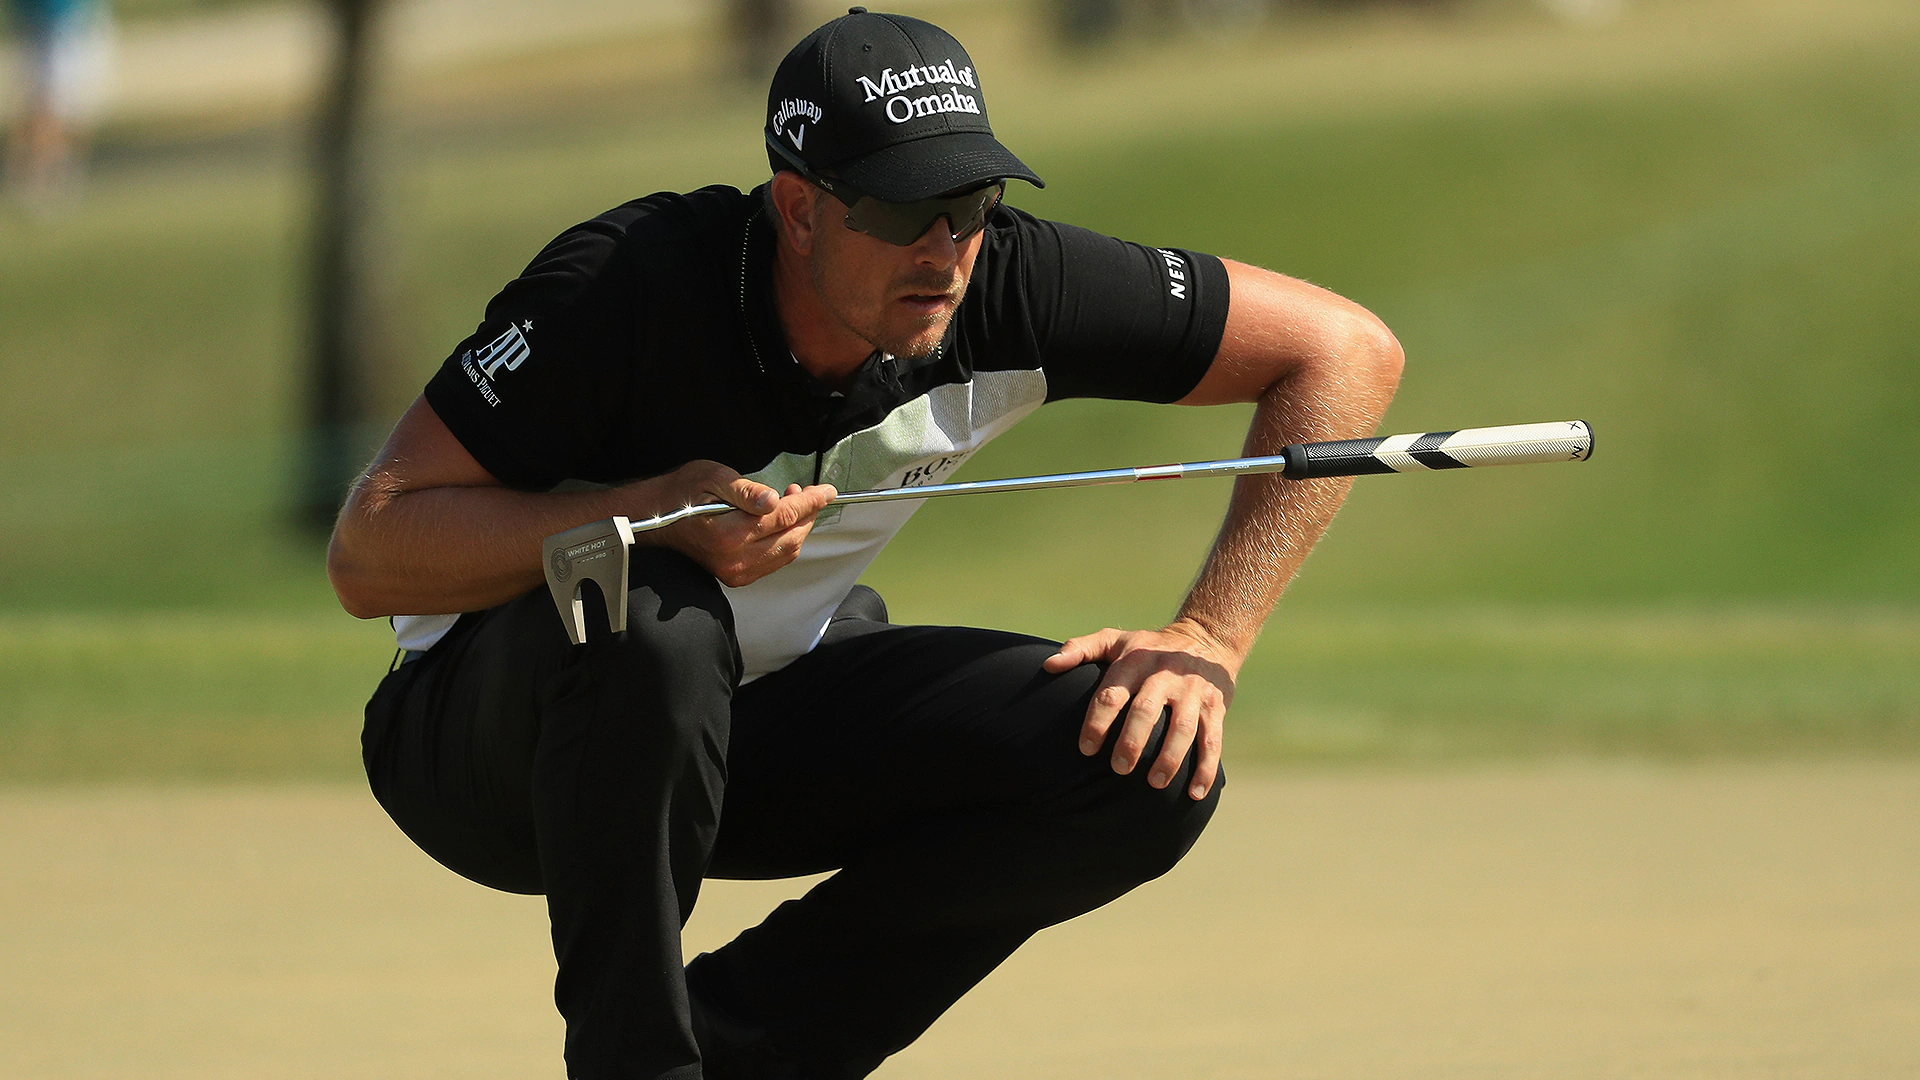 Balky putter leaves Stenson with another close call